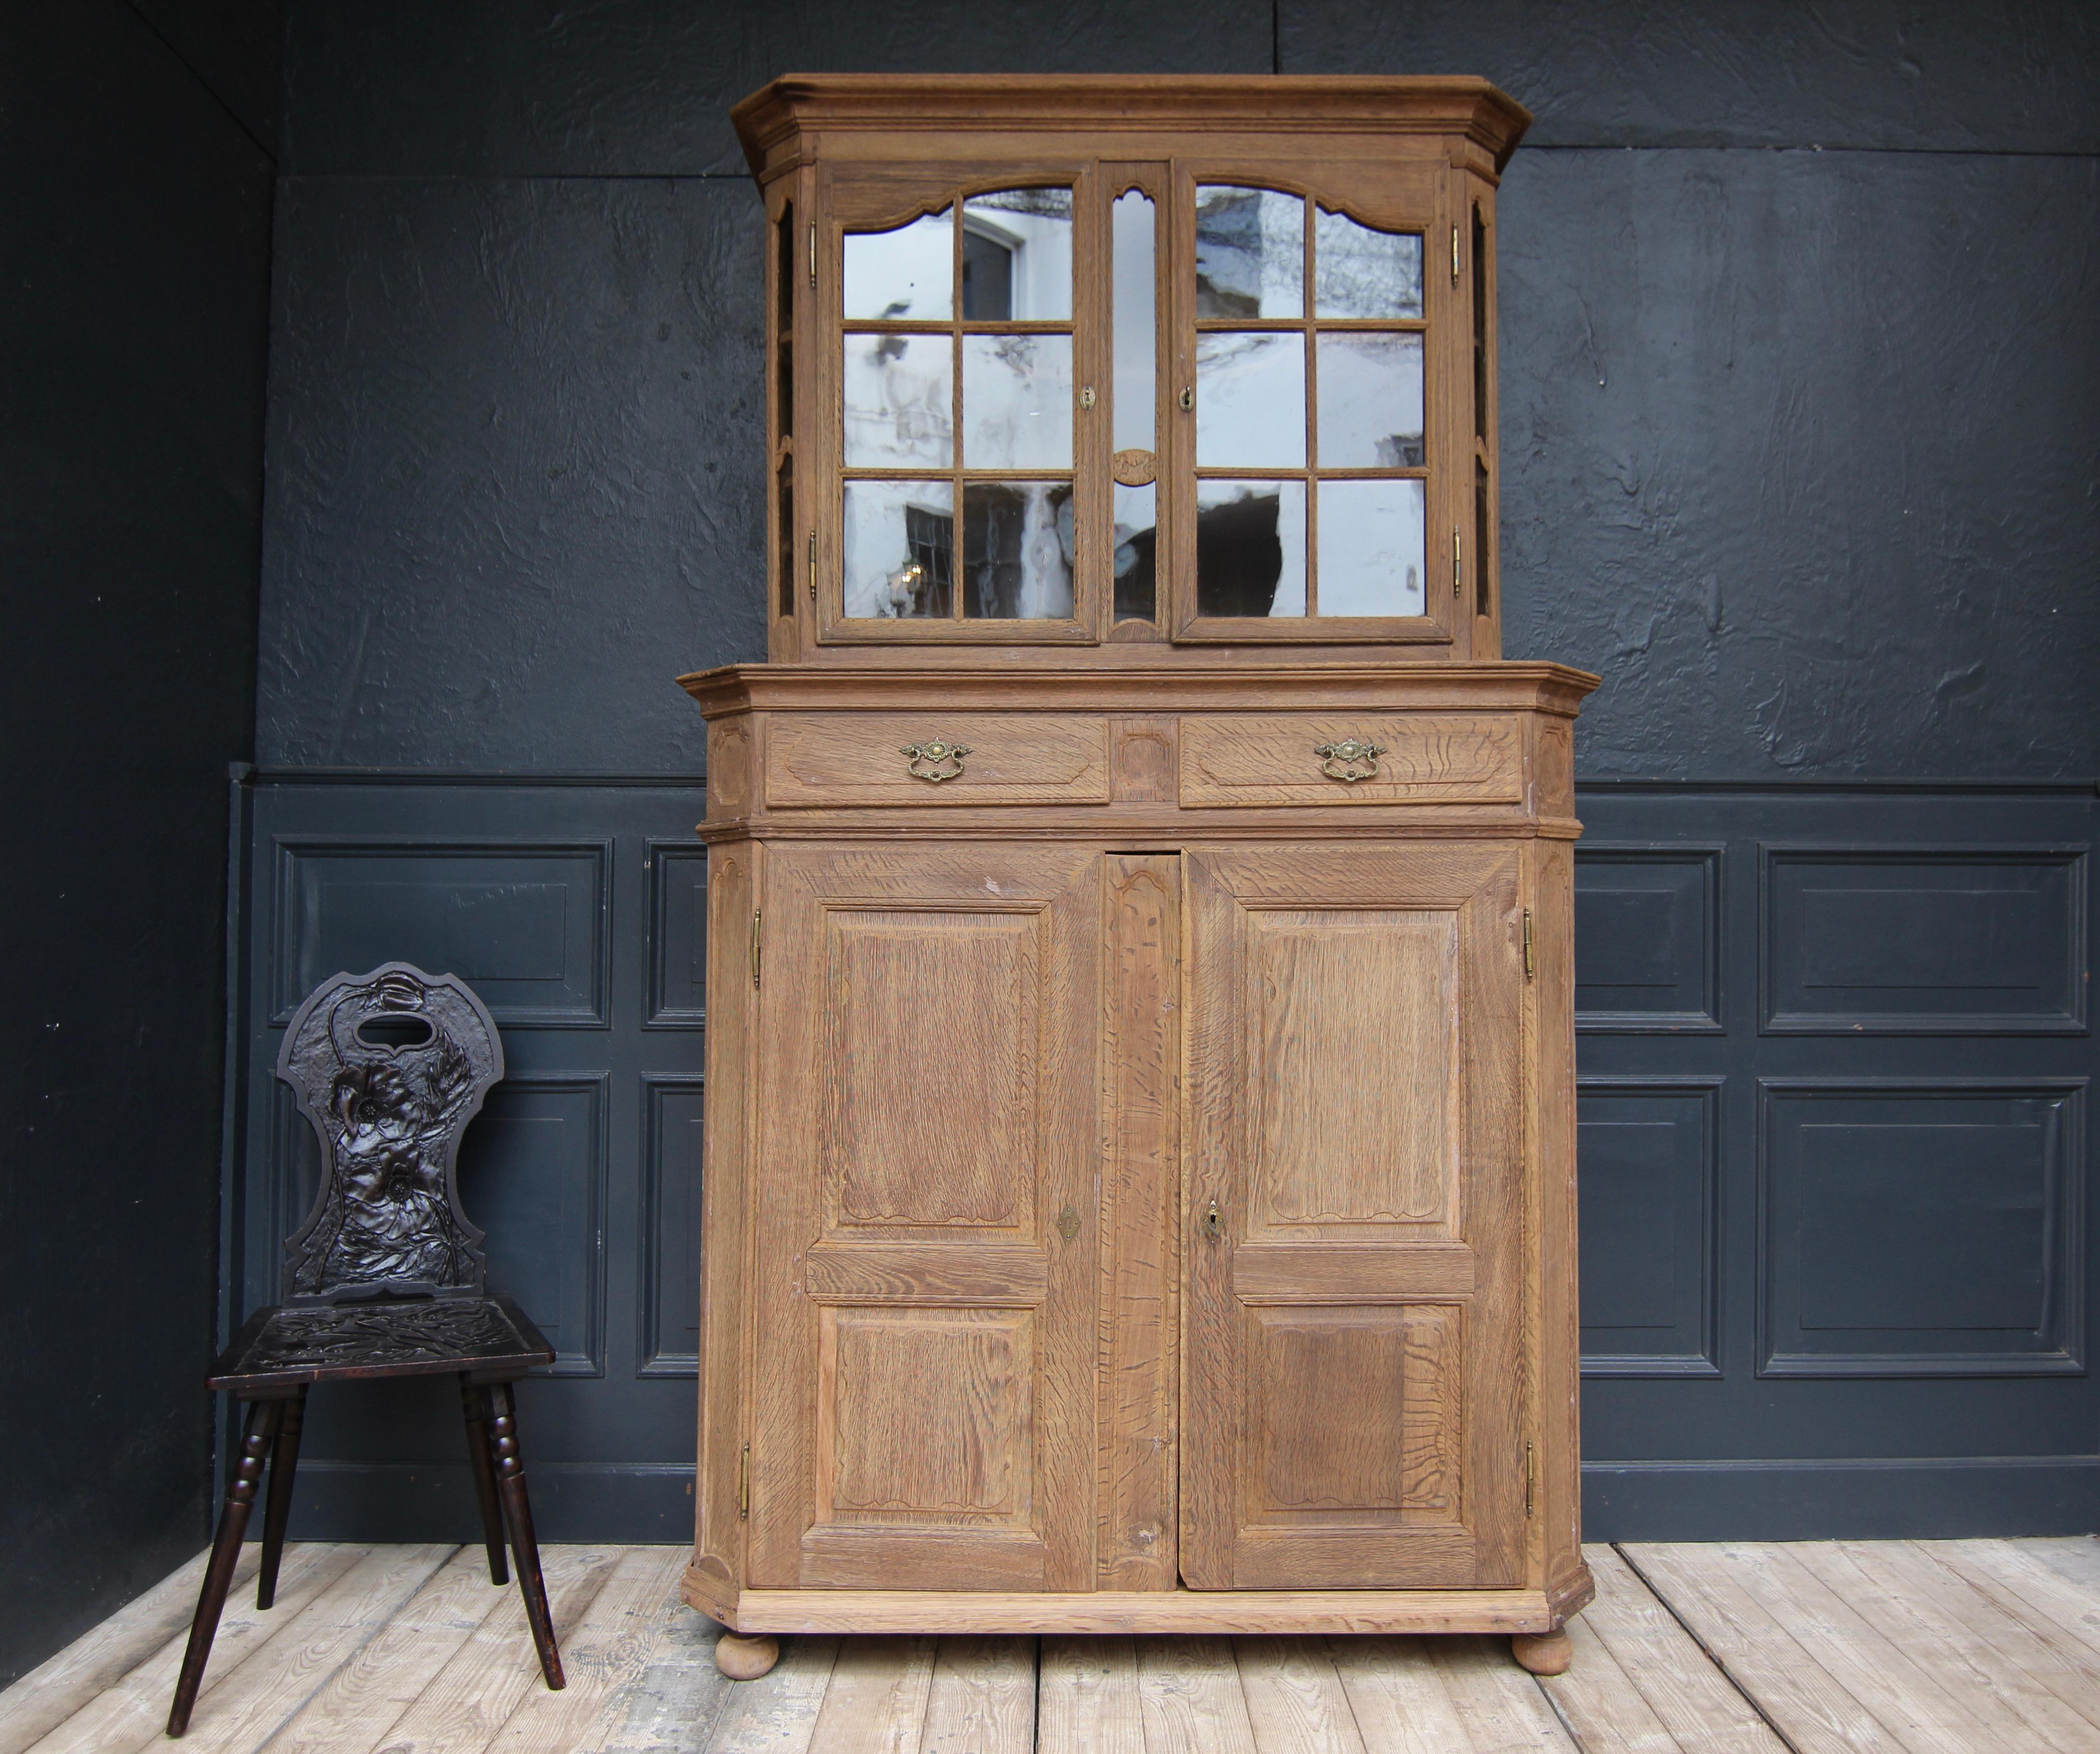 German provincial Baroque display cabinet or buffet. West German, 2nd half of the 18th century. Solidly made of oak and partially carved.

The wood has been stripped of the old wax, revealing the beautiful surface of the raw oak wood and allowing